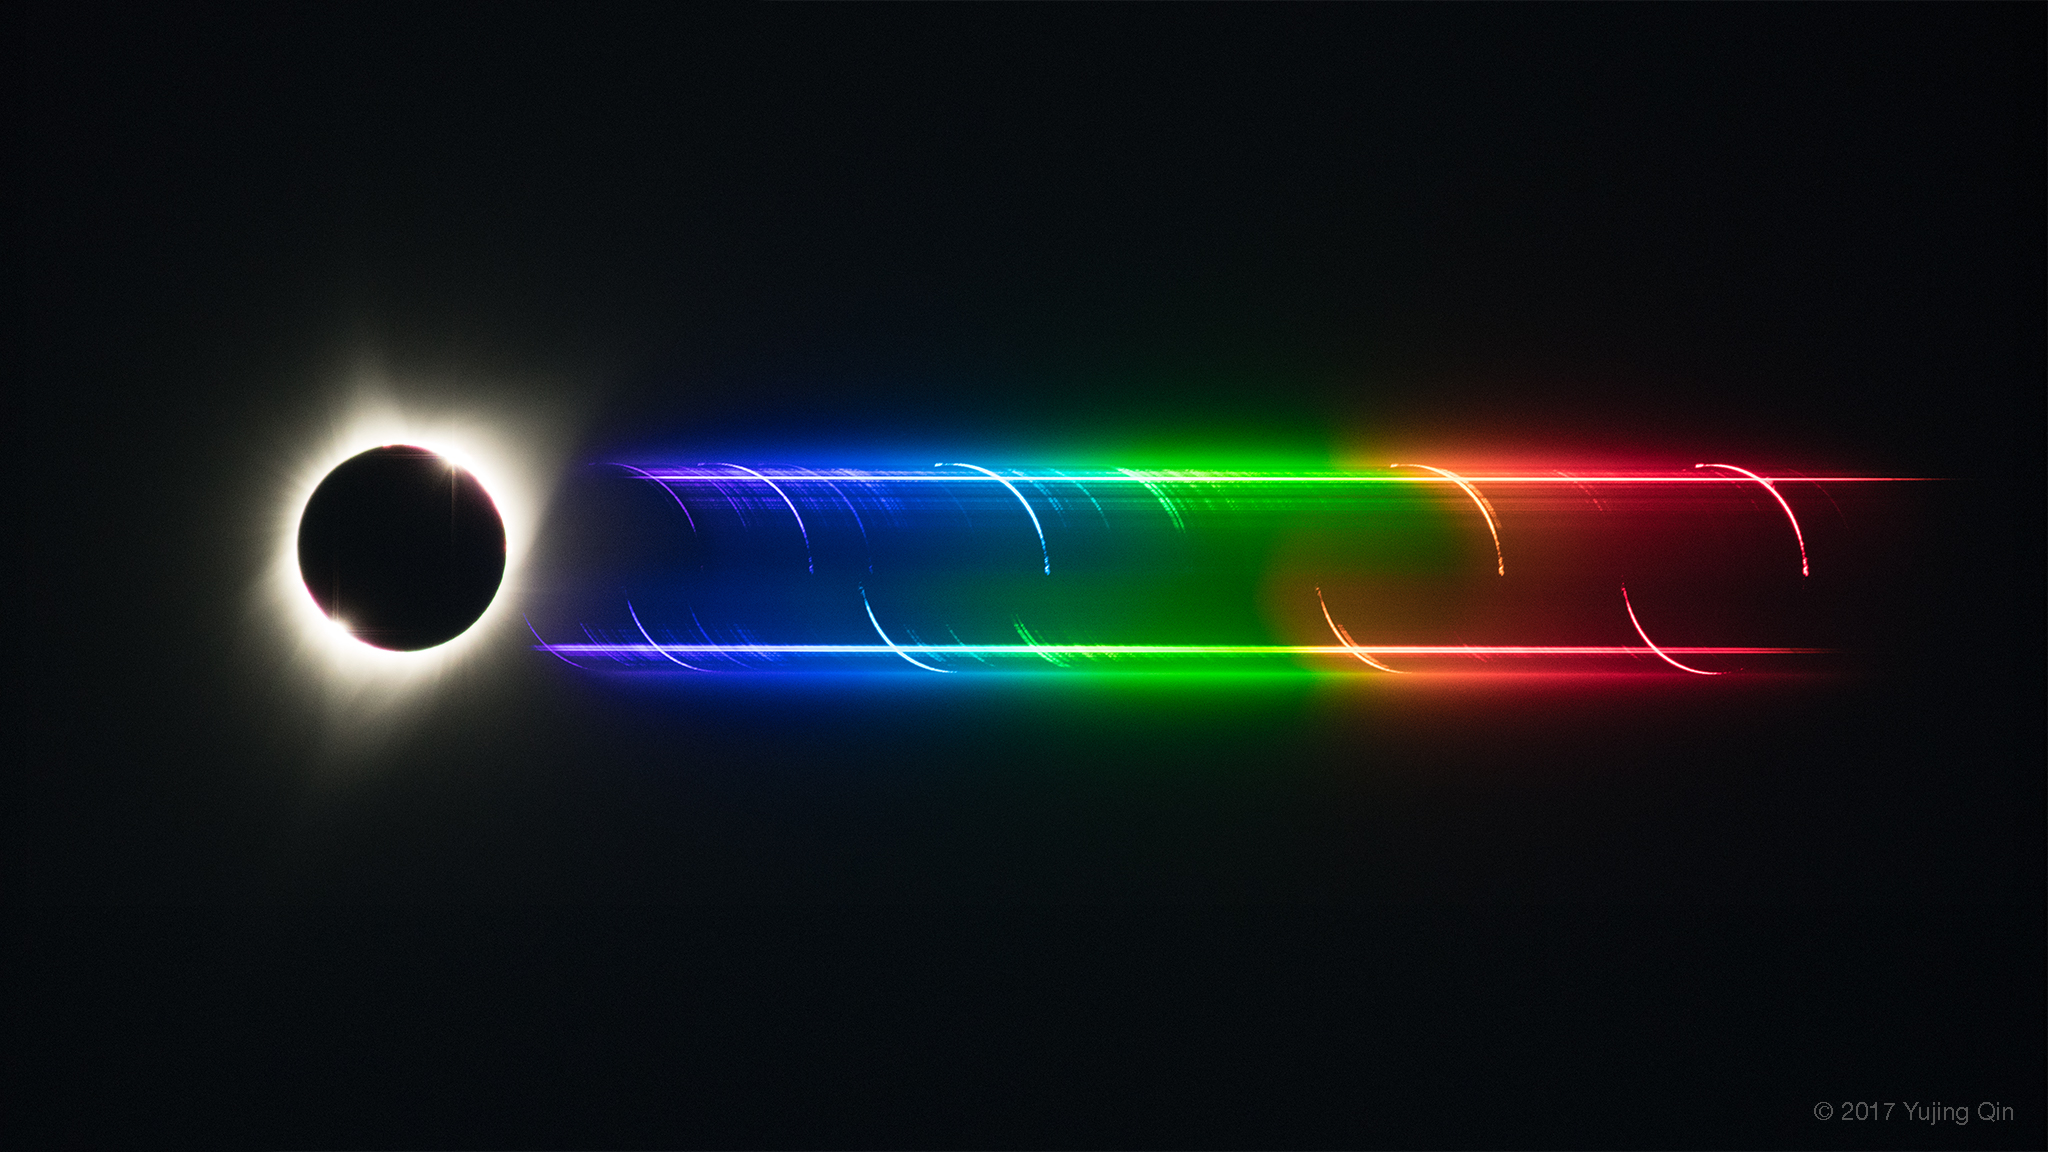 Flash spectrum as seen during 2017 total solar eclipse